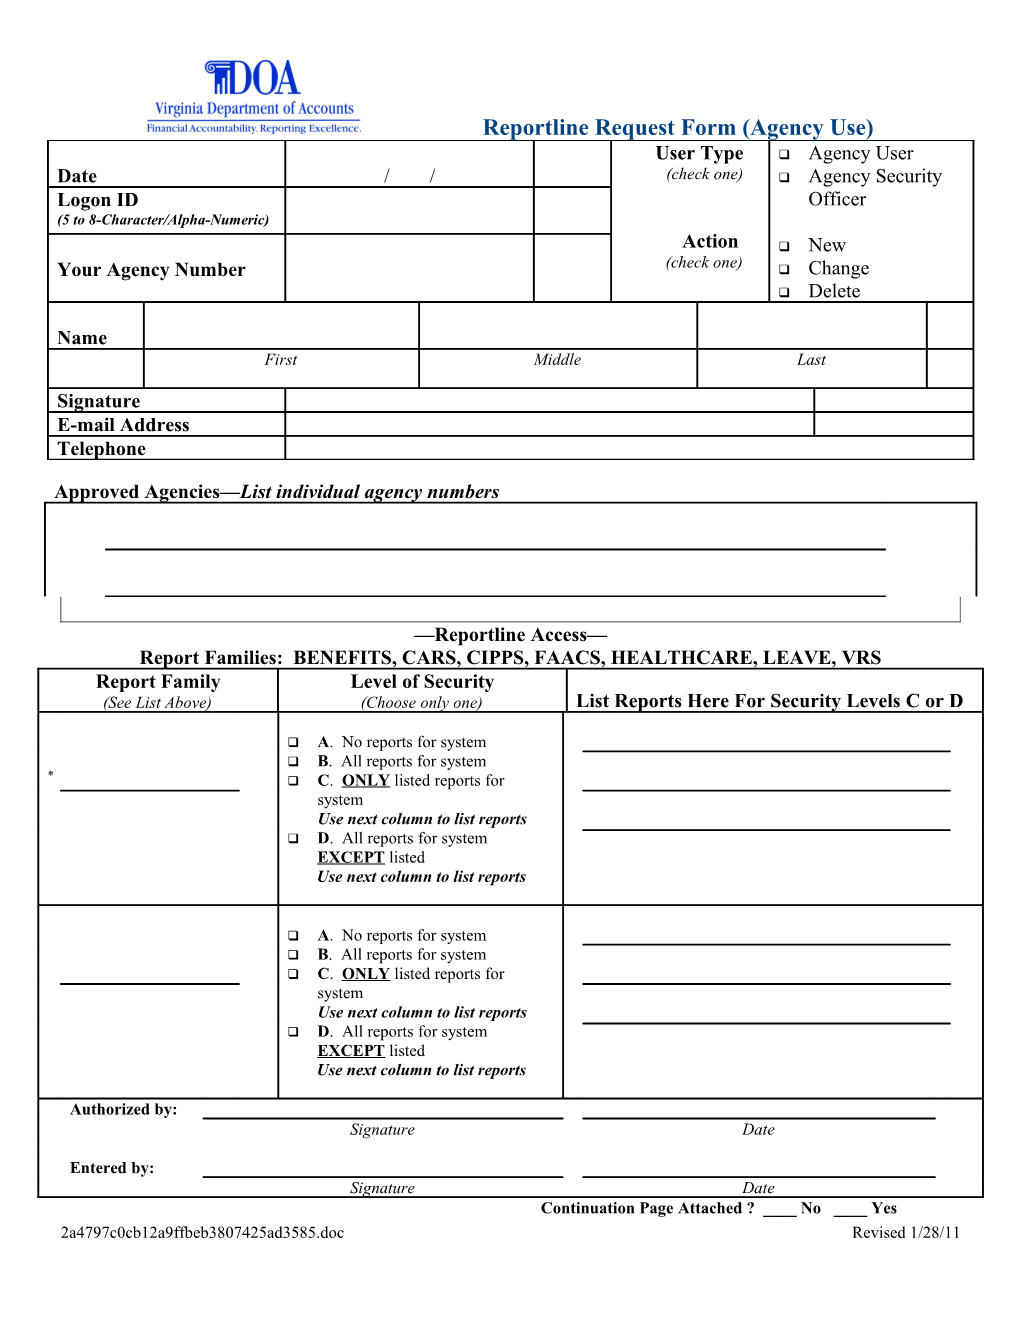 Reportline Request Form